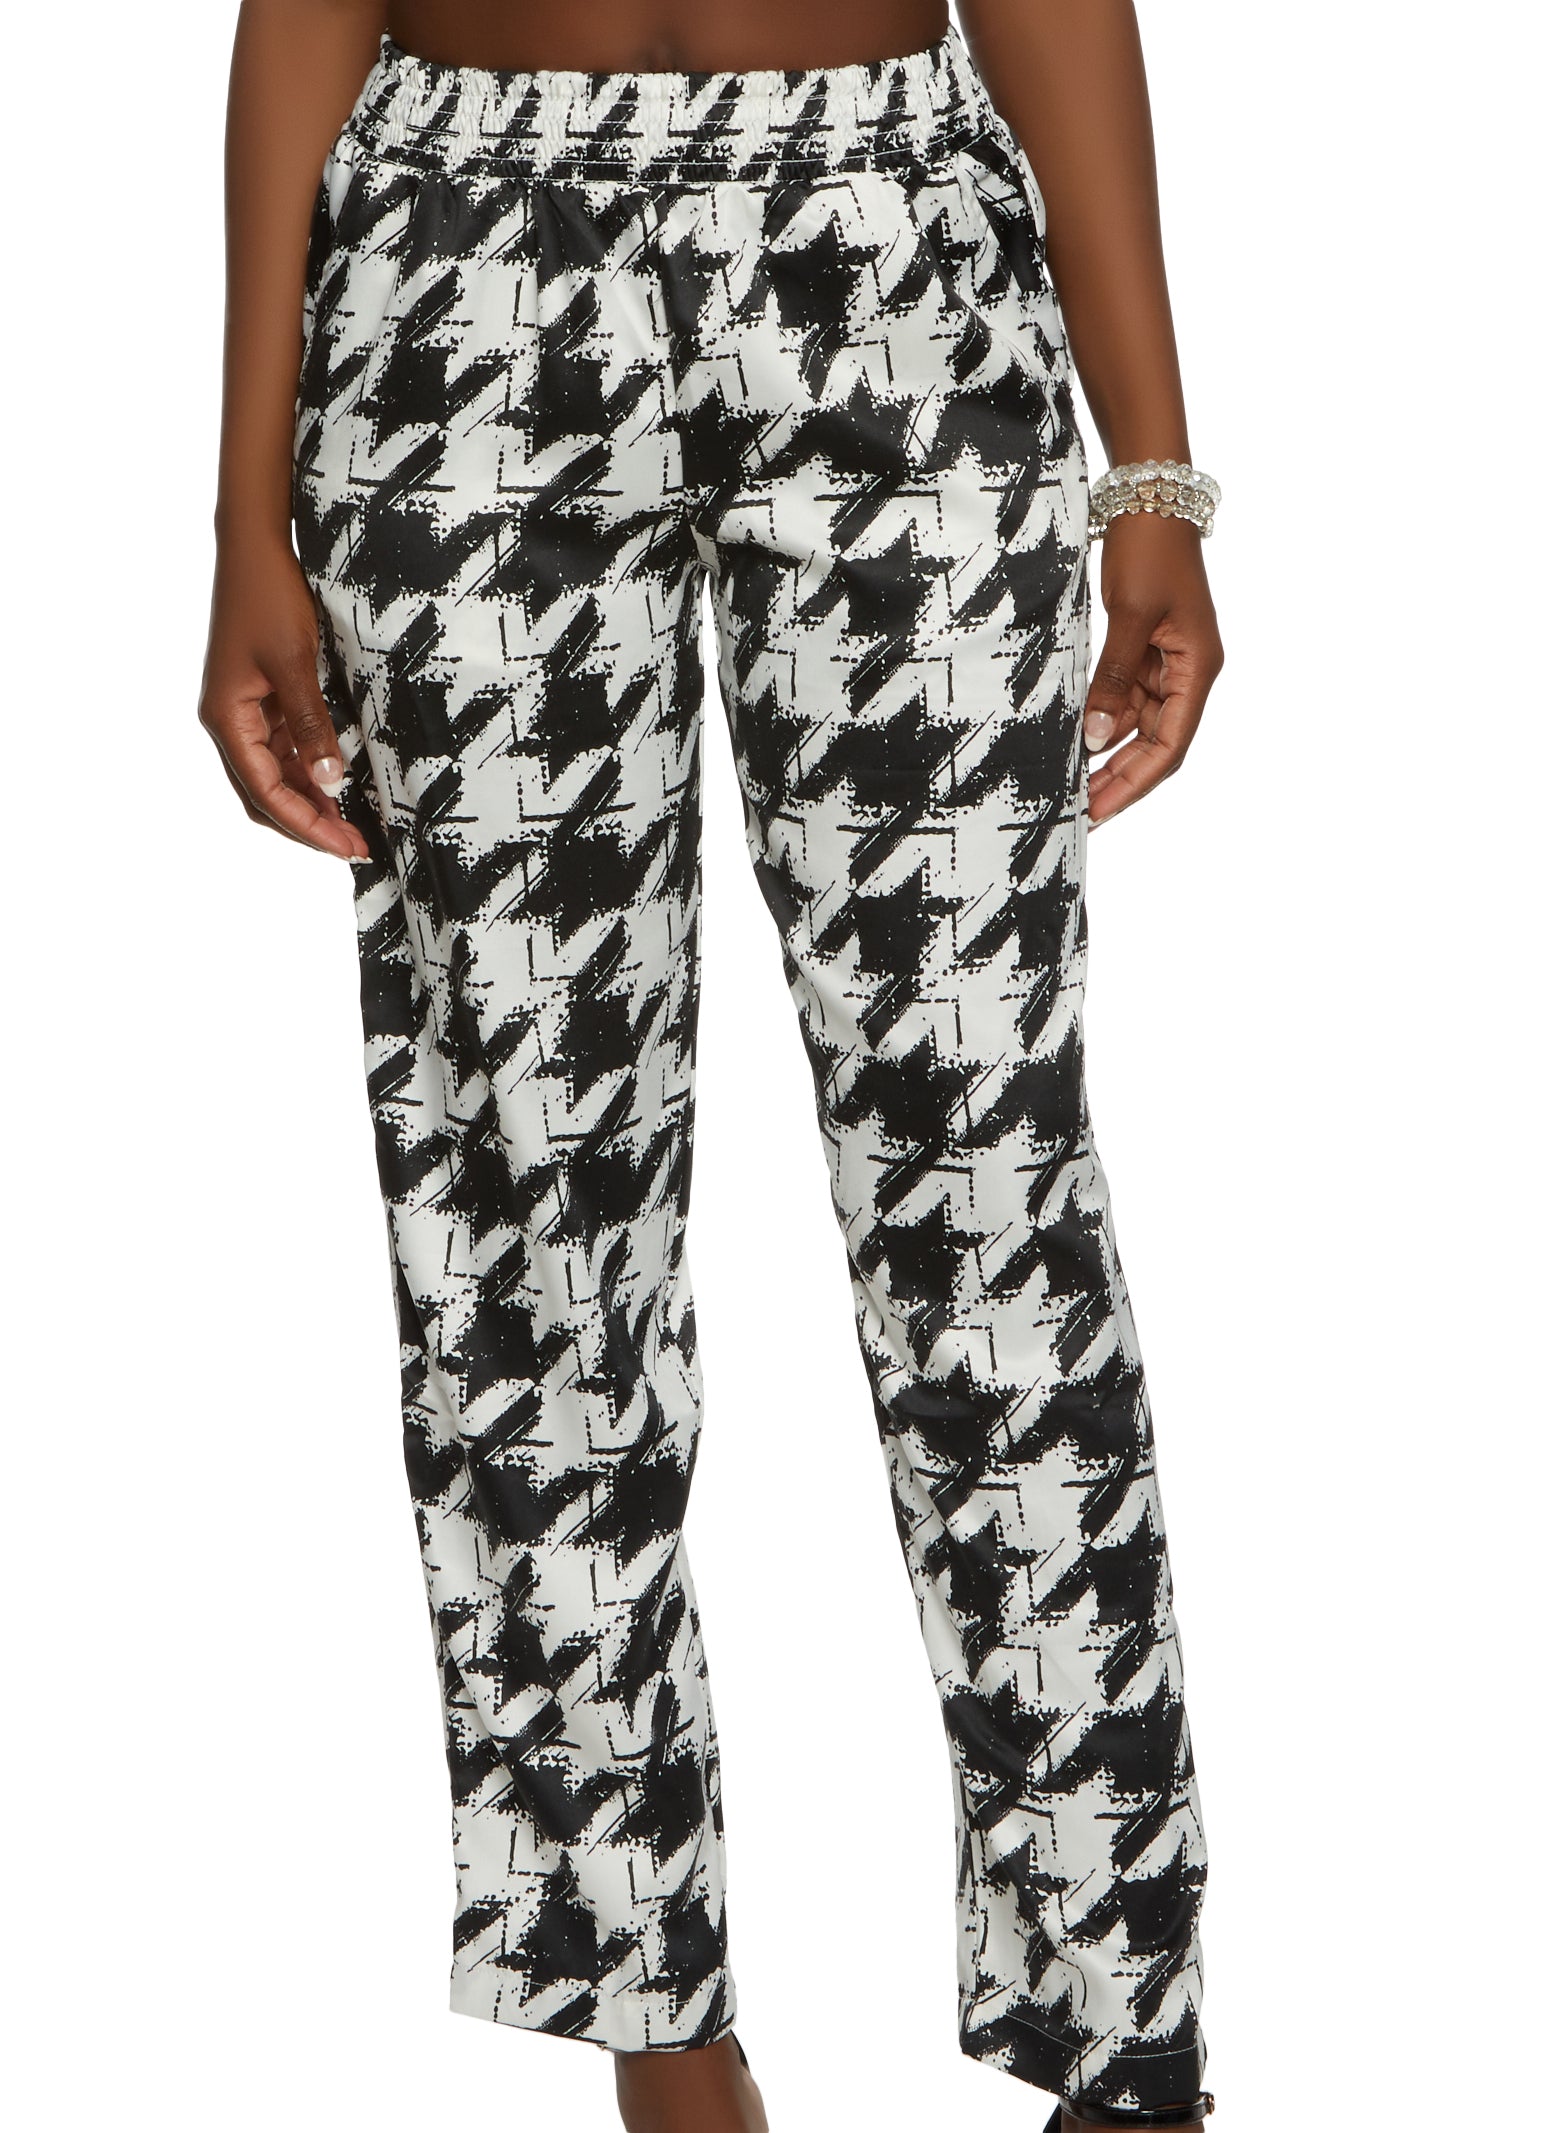 Houndstooth Pants Women | Houndstooth Trousers Womens | Houndstooth Pattern  Pants - Pants & Capris - Aliexpress